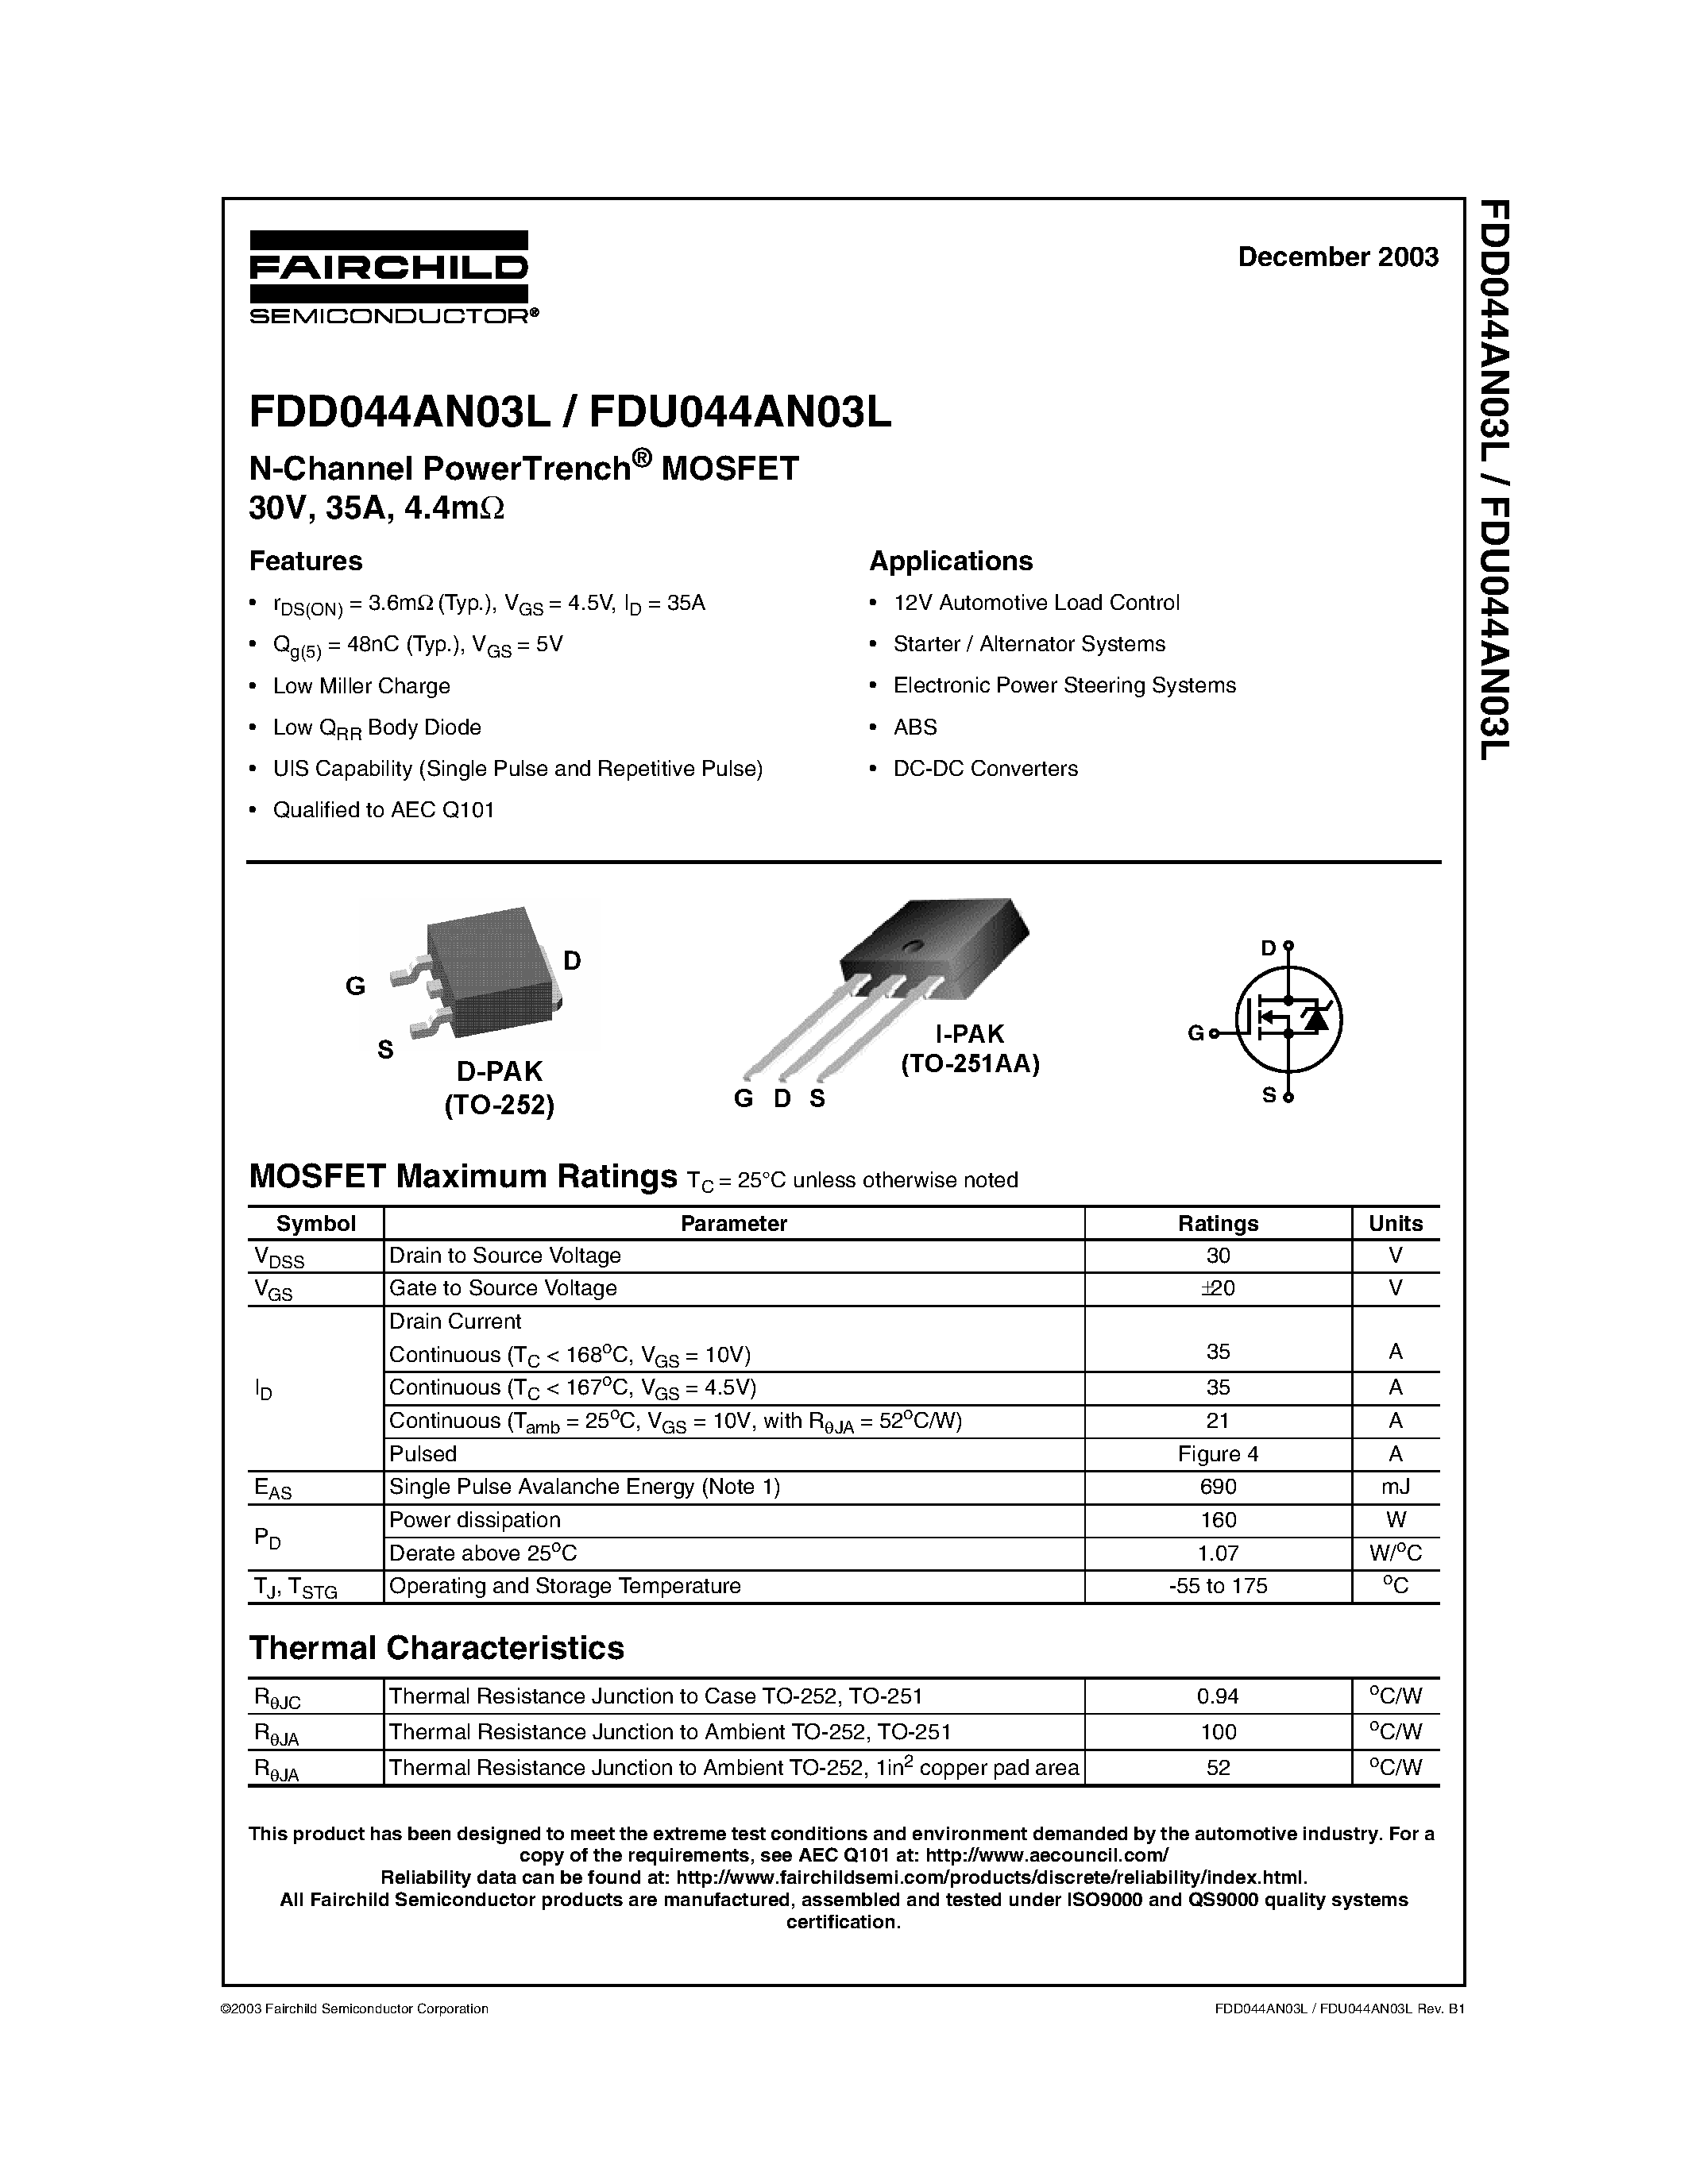 Даташит FDD044AN03L - N-Channel PowerTrench MOSFET страница 1